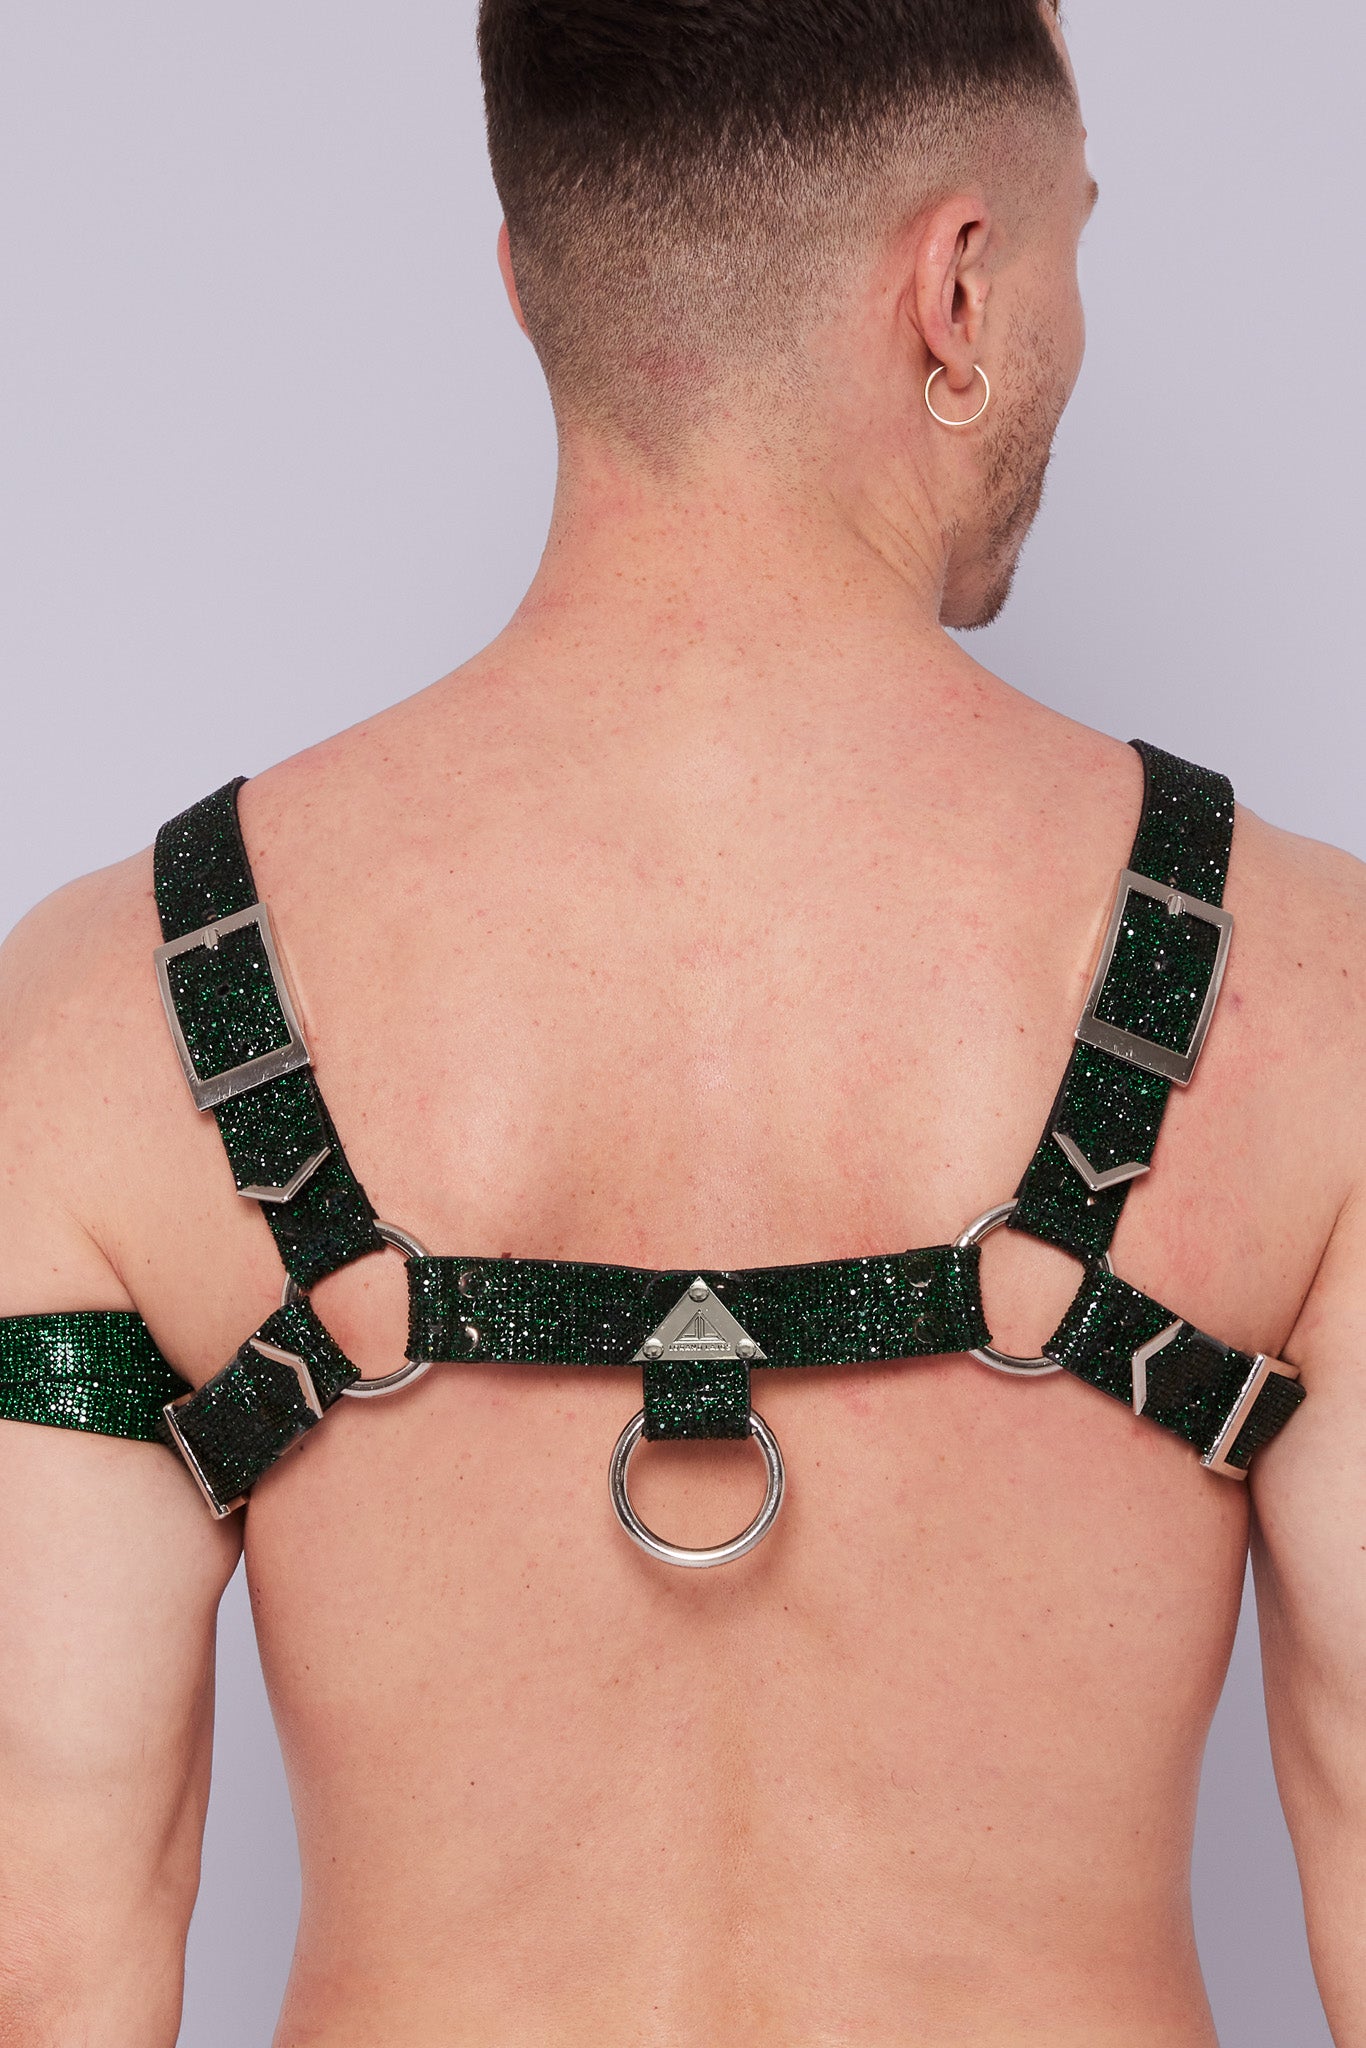 Elegant emerald green crystal-adorned H-Harness, exuding sophistication and style for men who want to make a statement at LGBTQ+ gatherings.